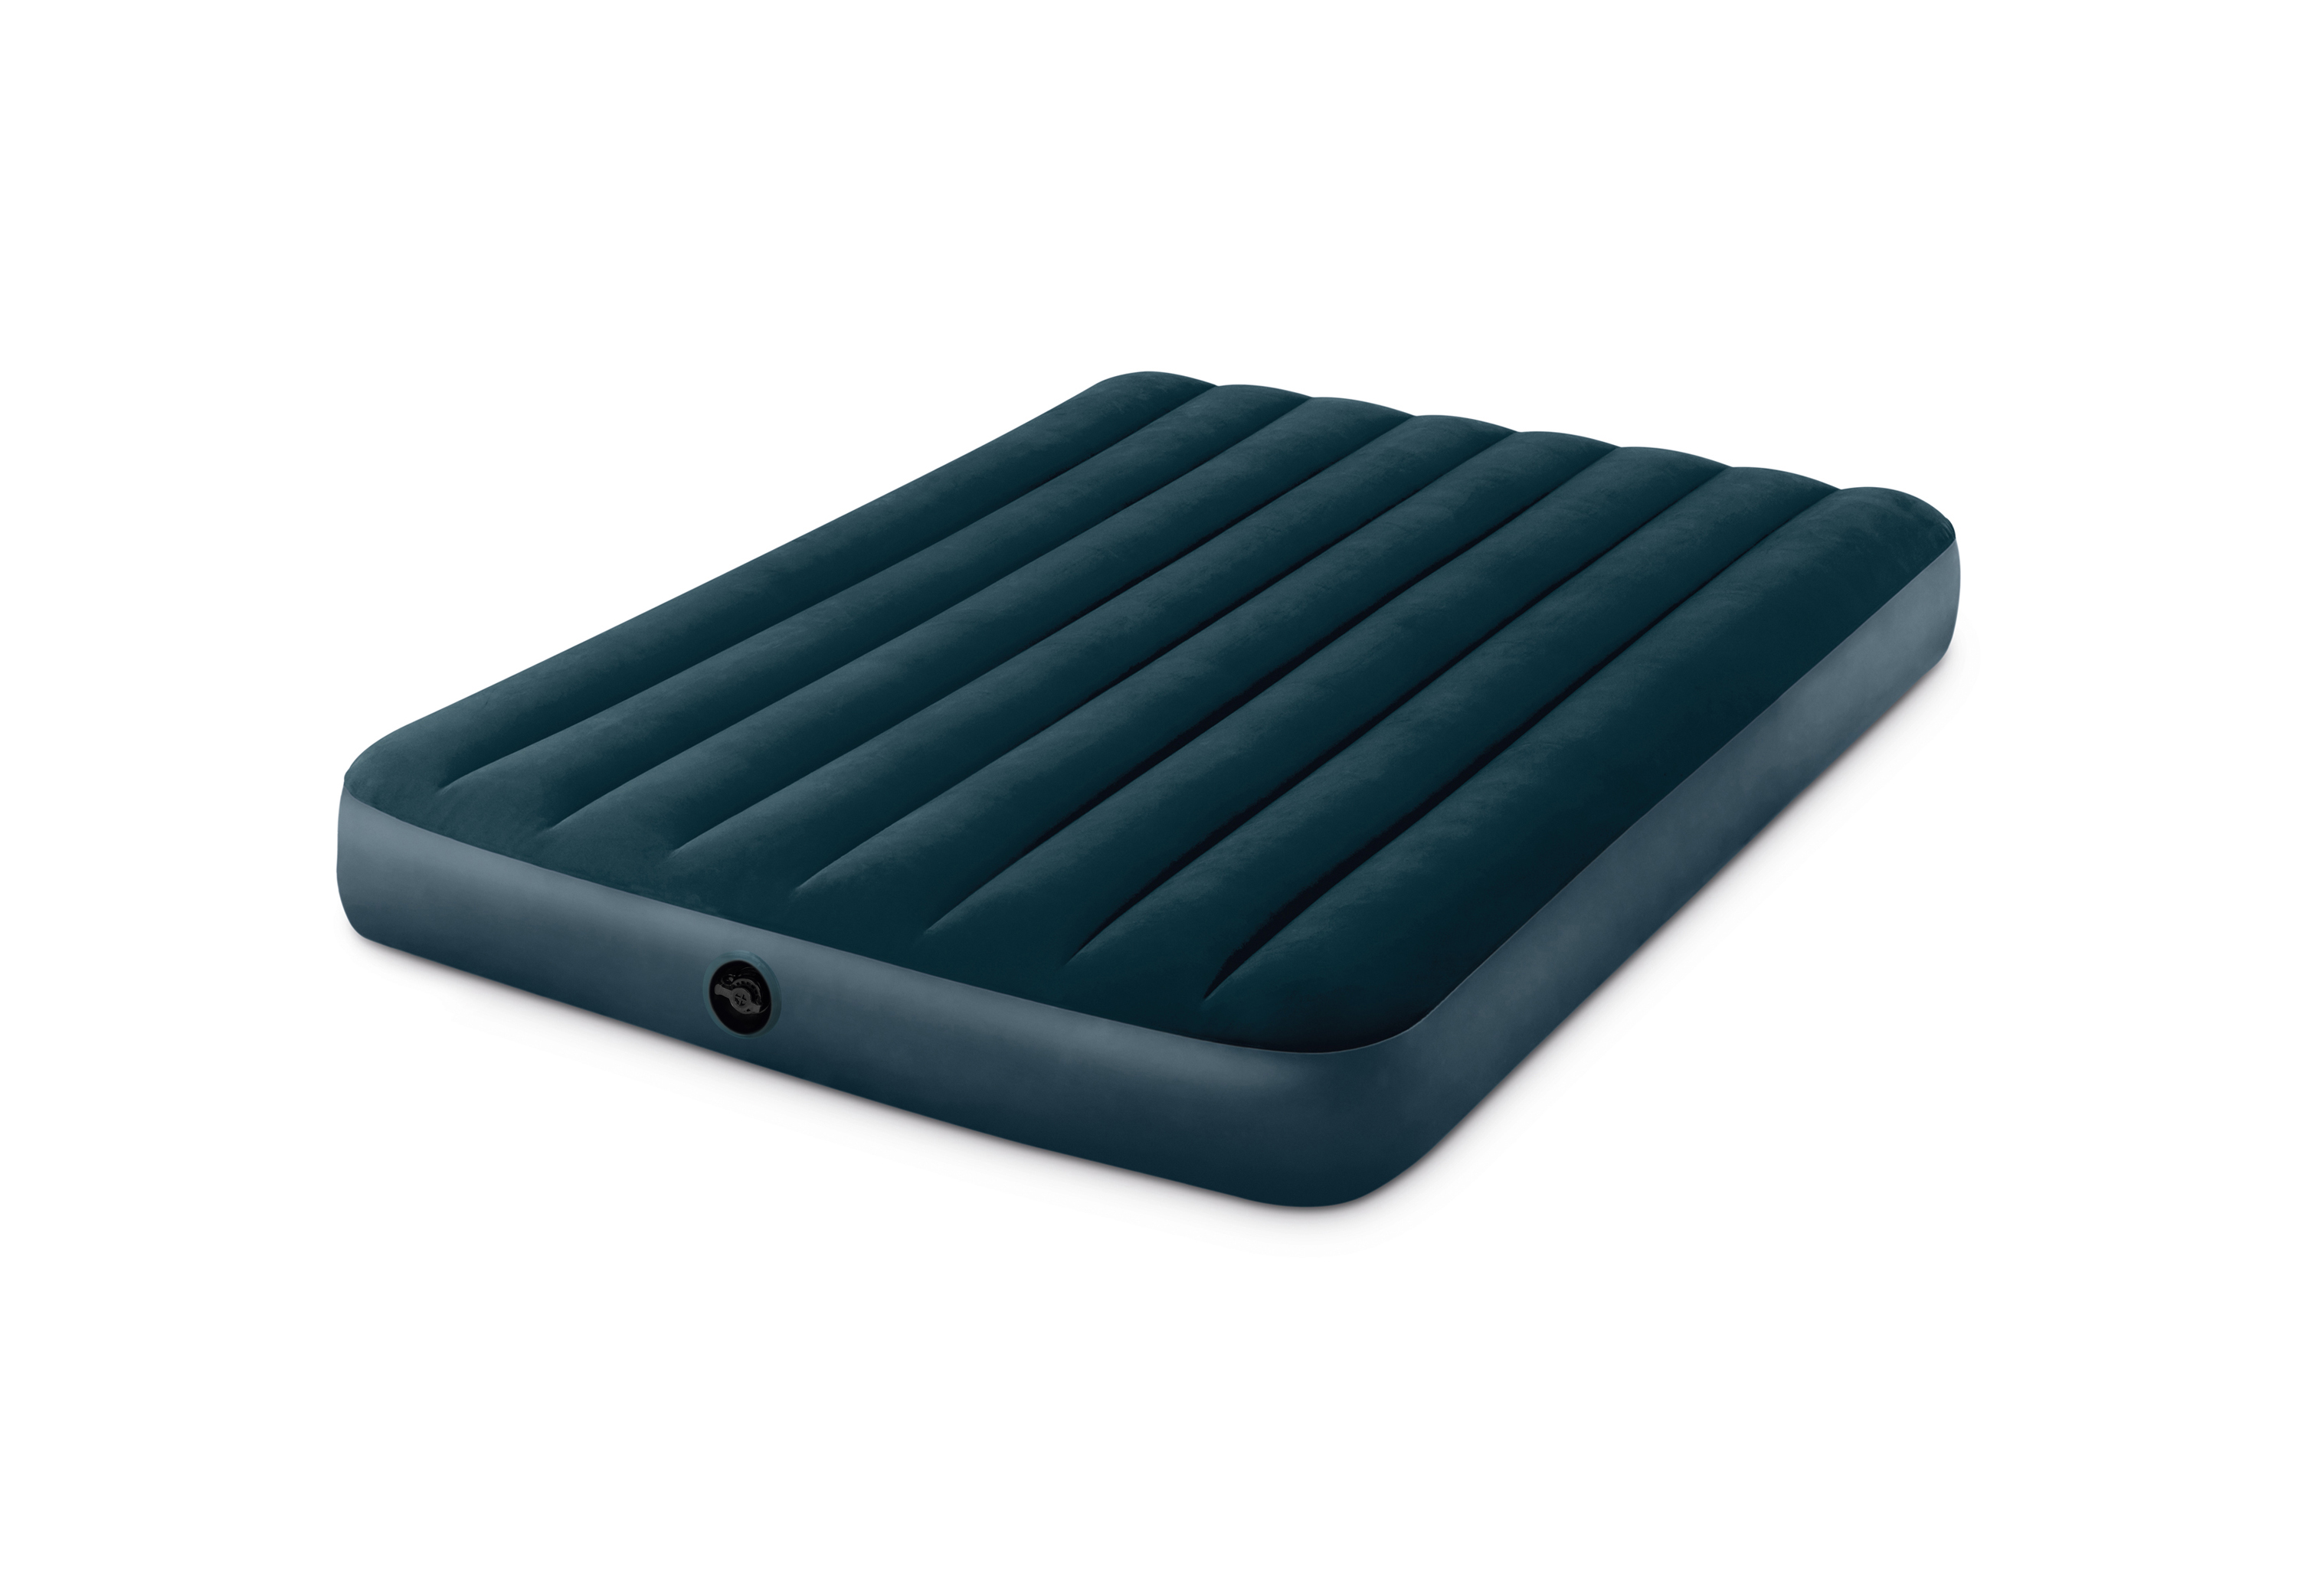 Intex 10" Standard Dura-Beam Airbed Mattress - Pump Not Included - FULL - image 4 of 10